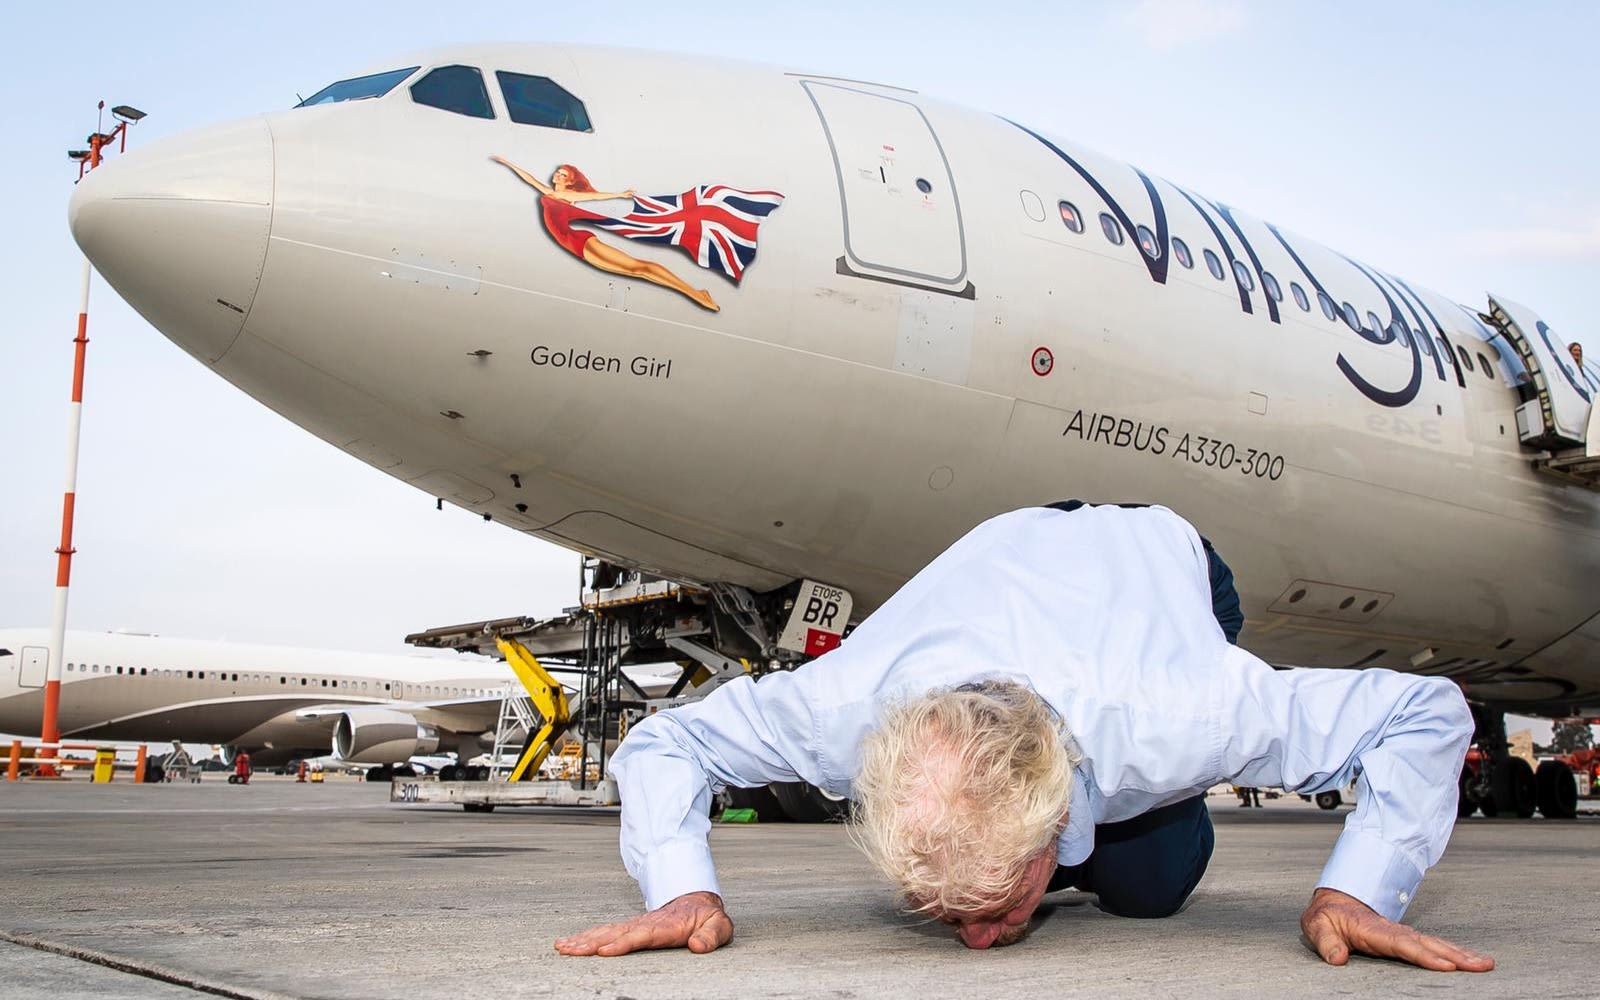 Richard Branson kisses the ground in front of a plane